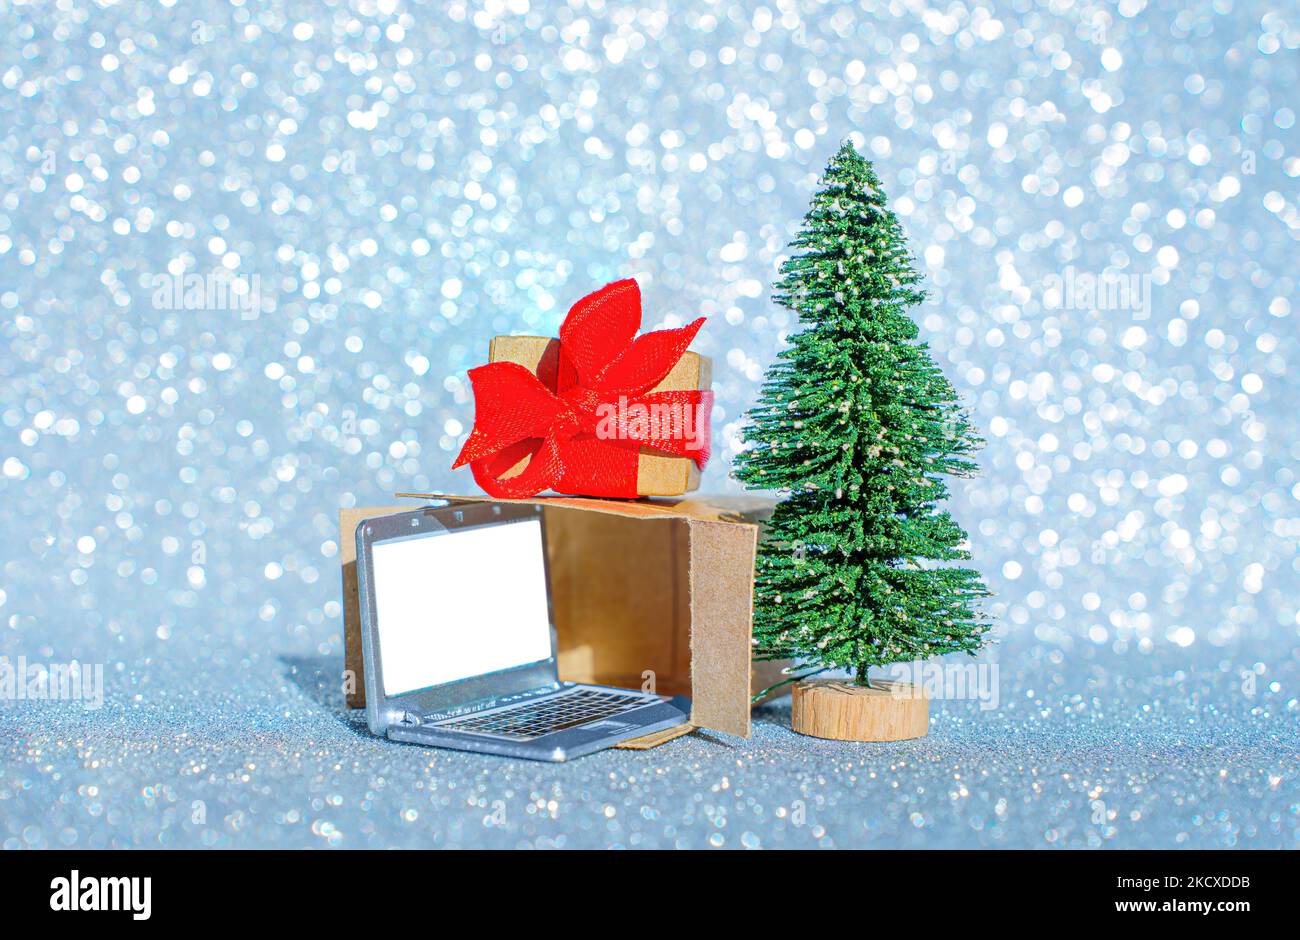 Unwrapped gift box with a miniature laptop by a toy christmas tree with glittering background. Electronics as a holiday present. Stock Photo